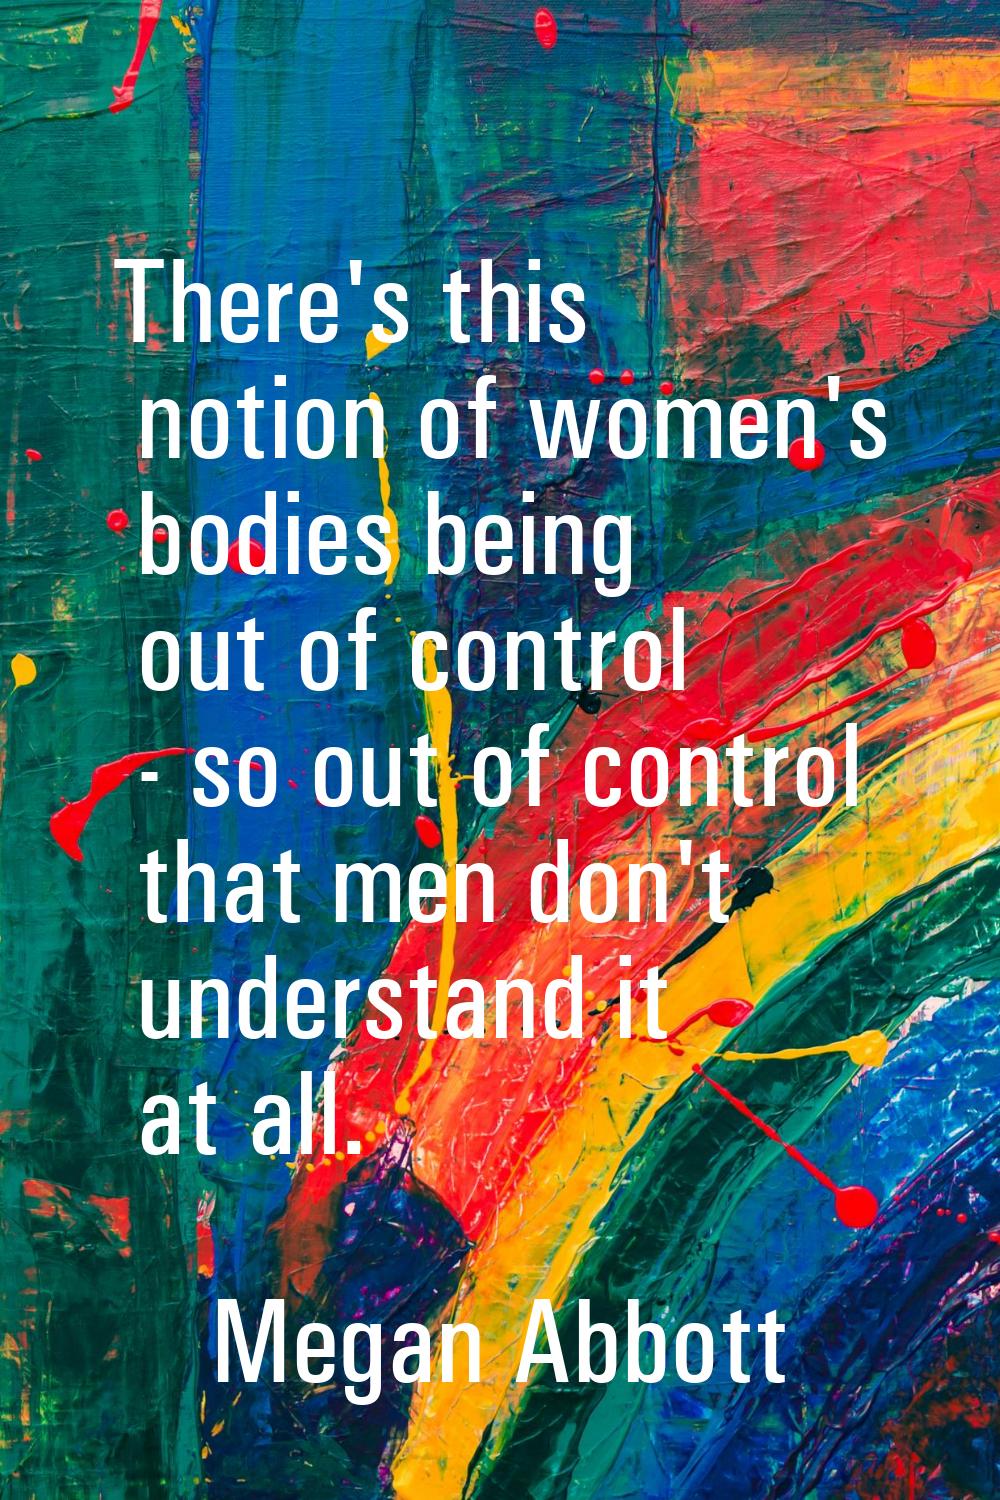 There's this notion of women's bodies being out of control - so out of control that men don't under